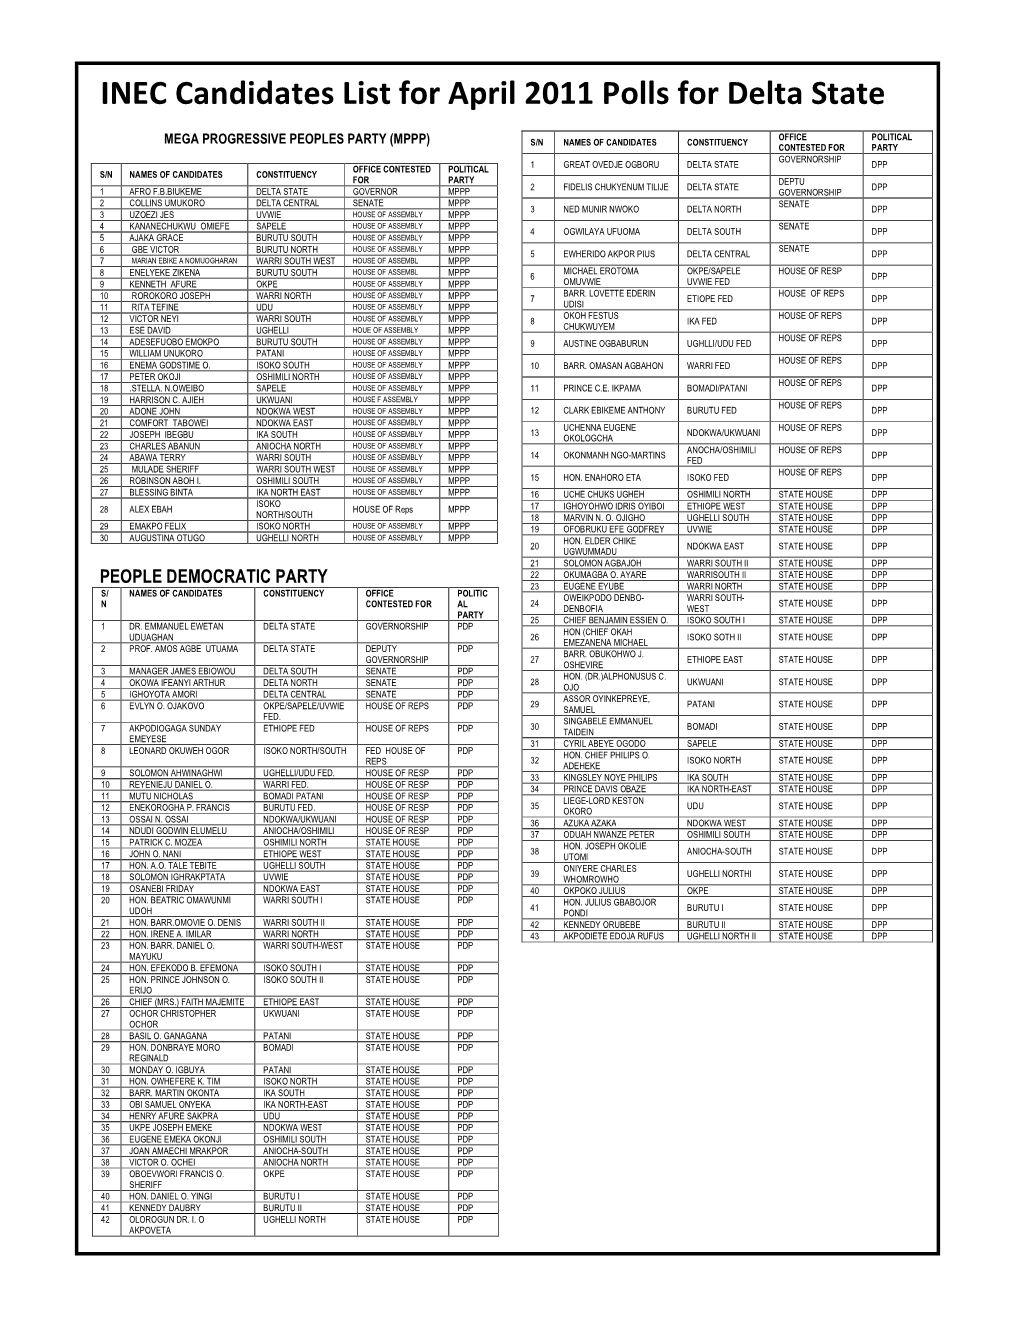 INEC Candidates List for April 2011 Polls for Delta State